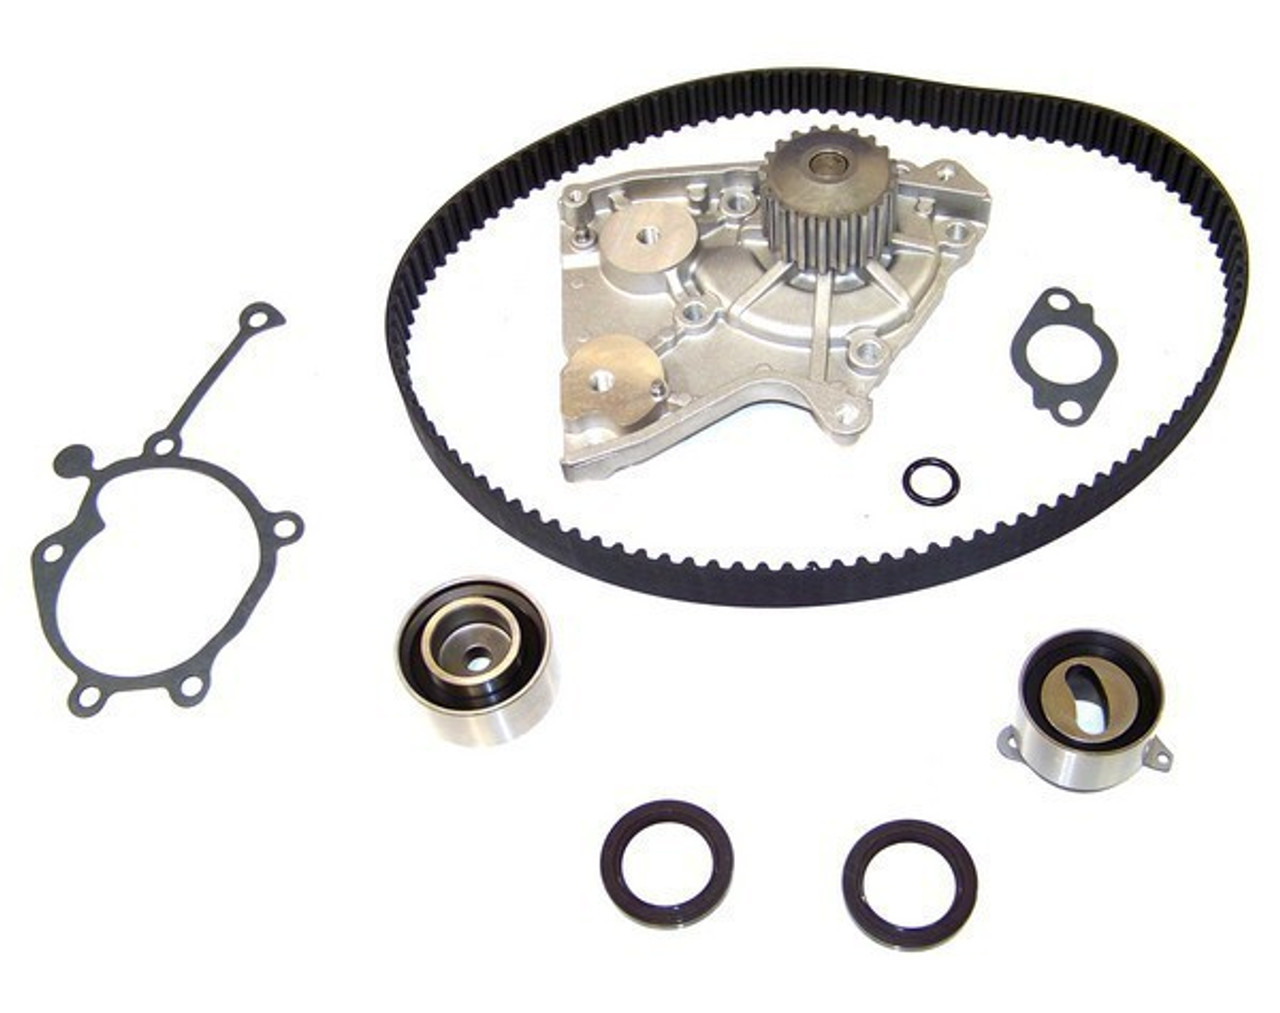 1989 Mazda MX-6 2.2L Engine Timing Belt Kit with Water Pump TBK408WP -18